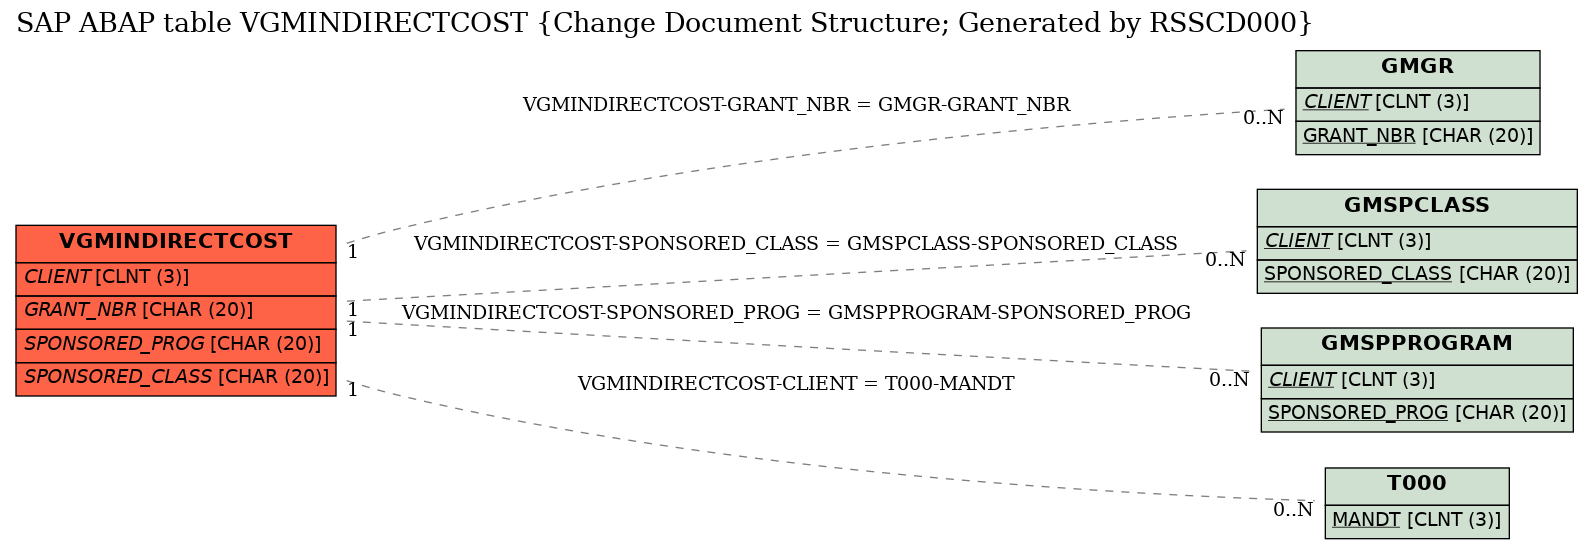 E-R Diagram for table VGMINDIRECTCOST (Change Document Structure; Generated by RSSCD000)